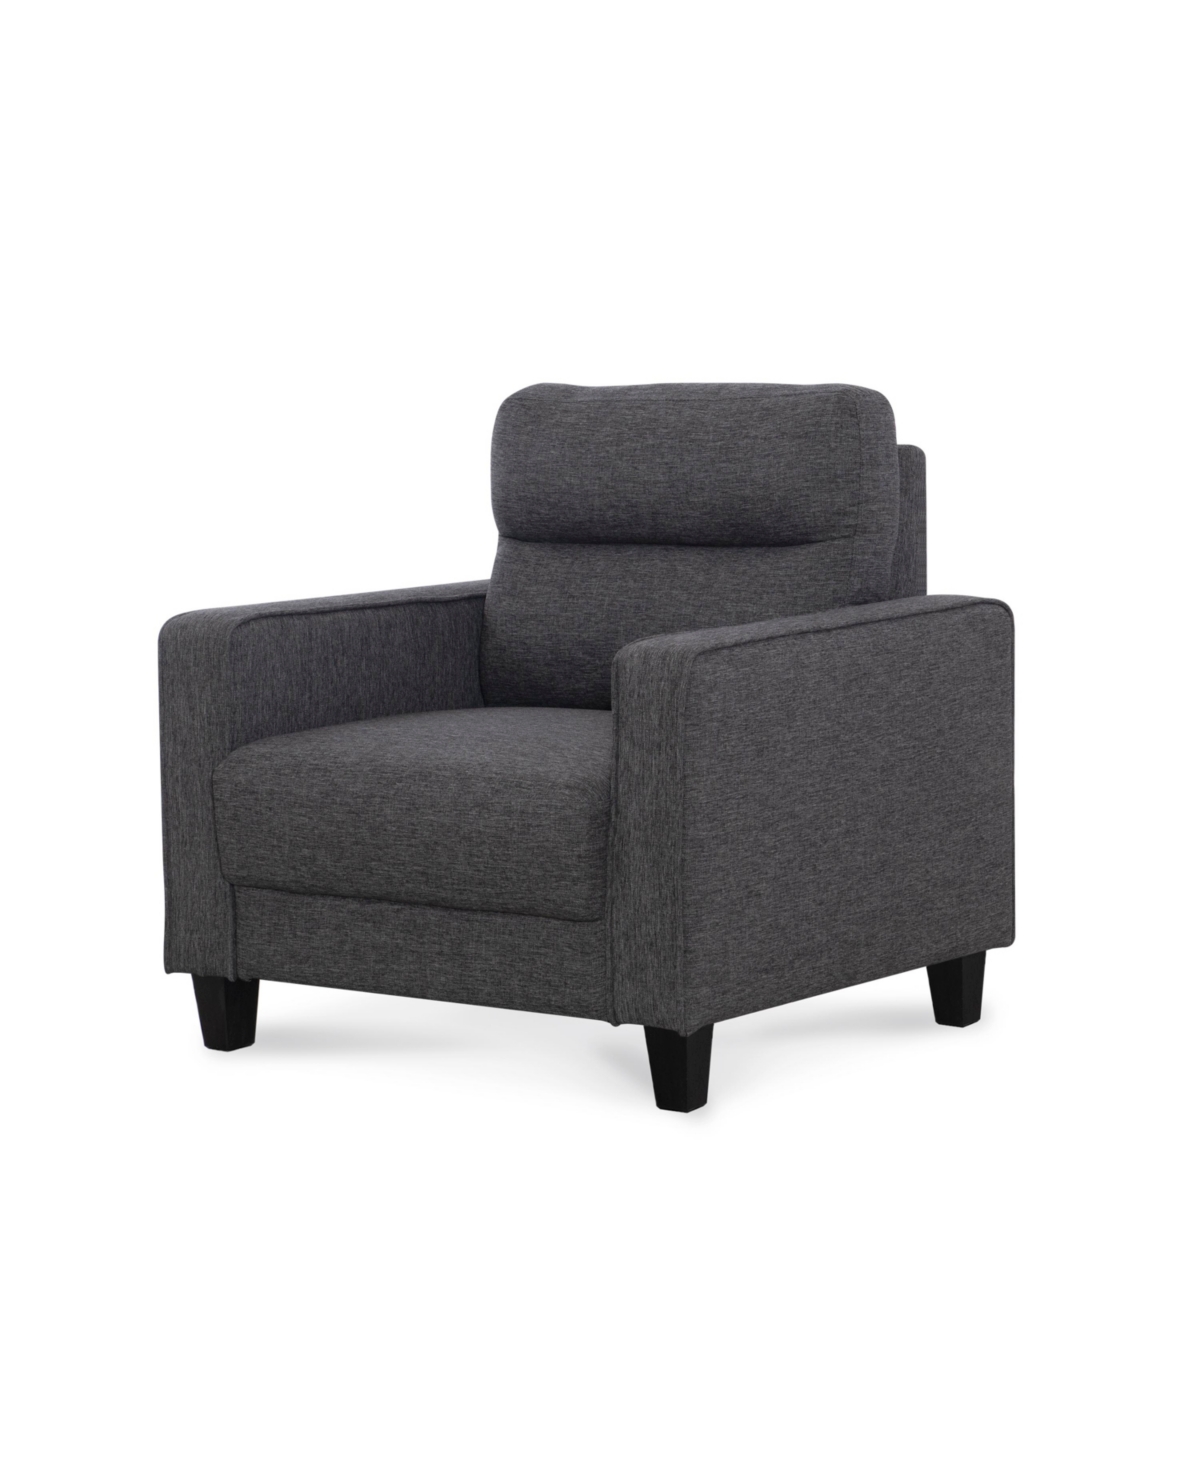 Home Furniture Outfitters Asher Channeled Chair In Gray